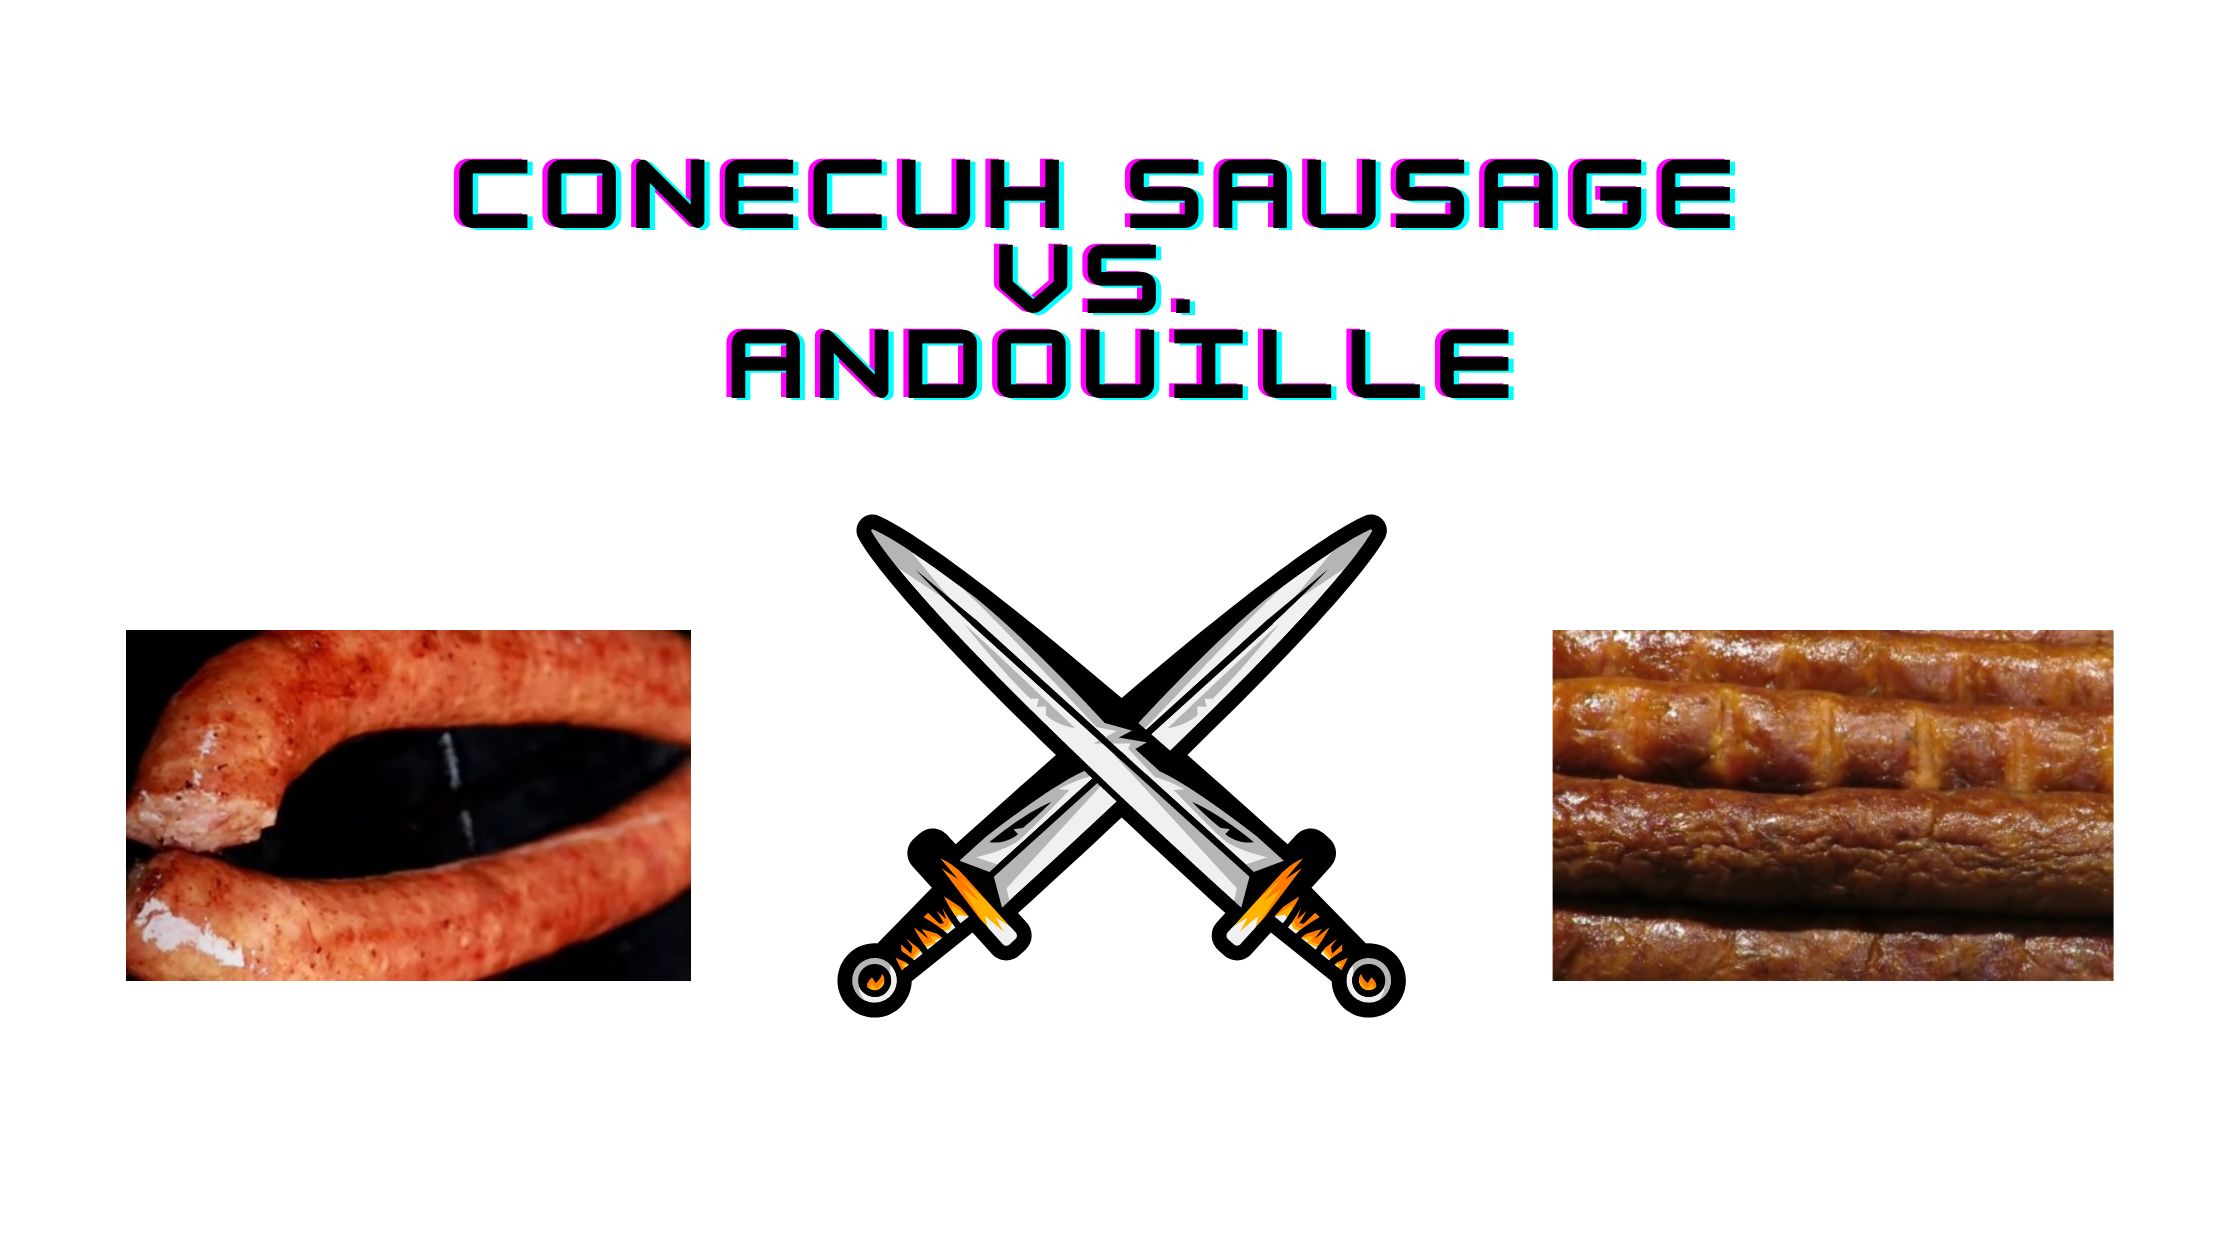 What makes Conecuh sausage different from Andouille